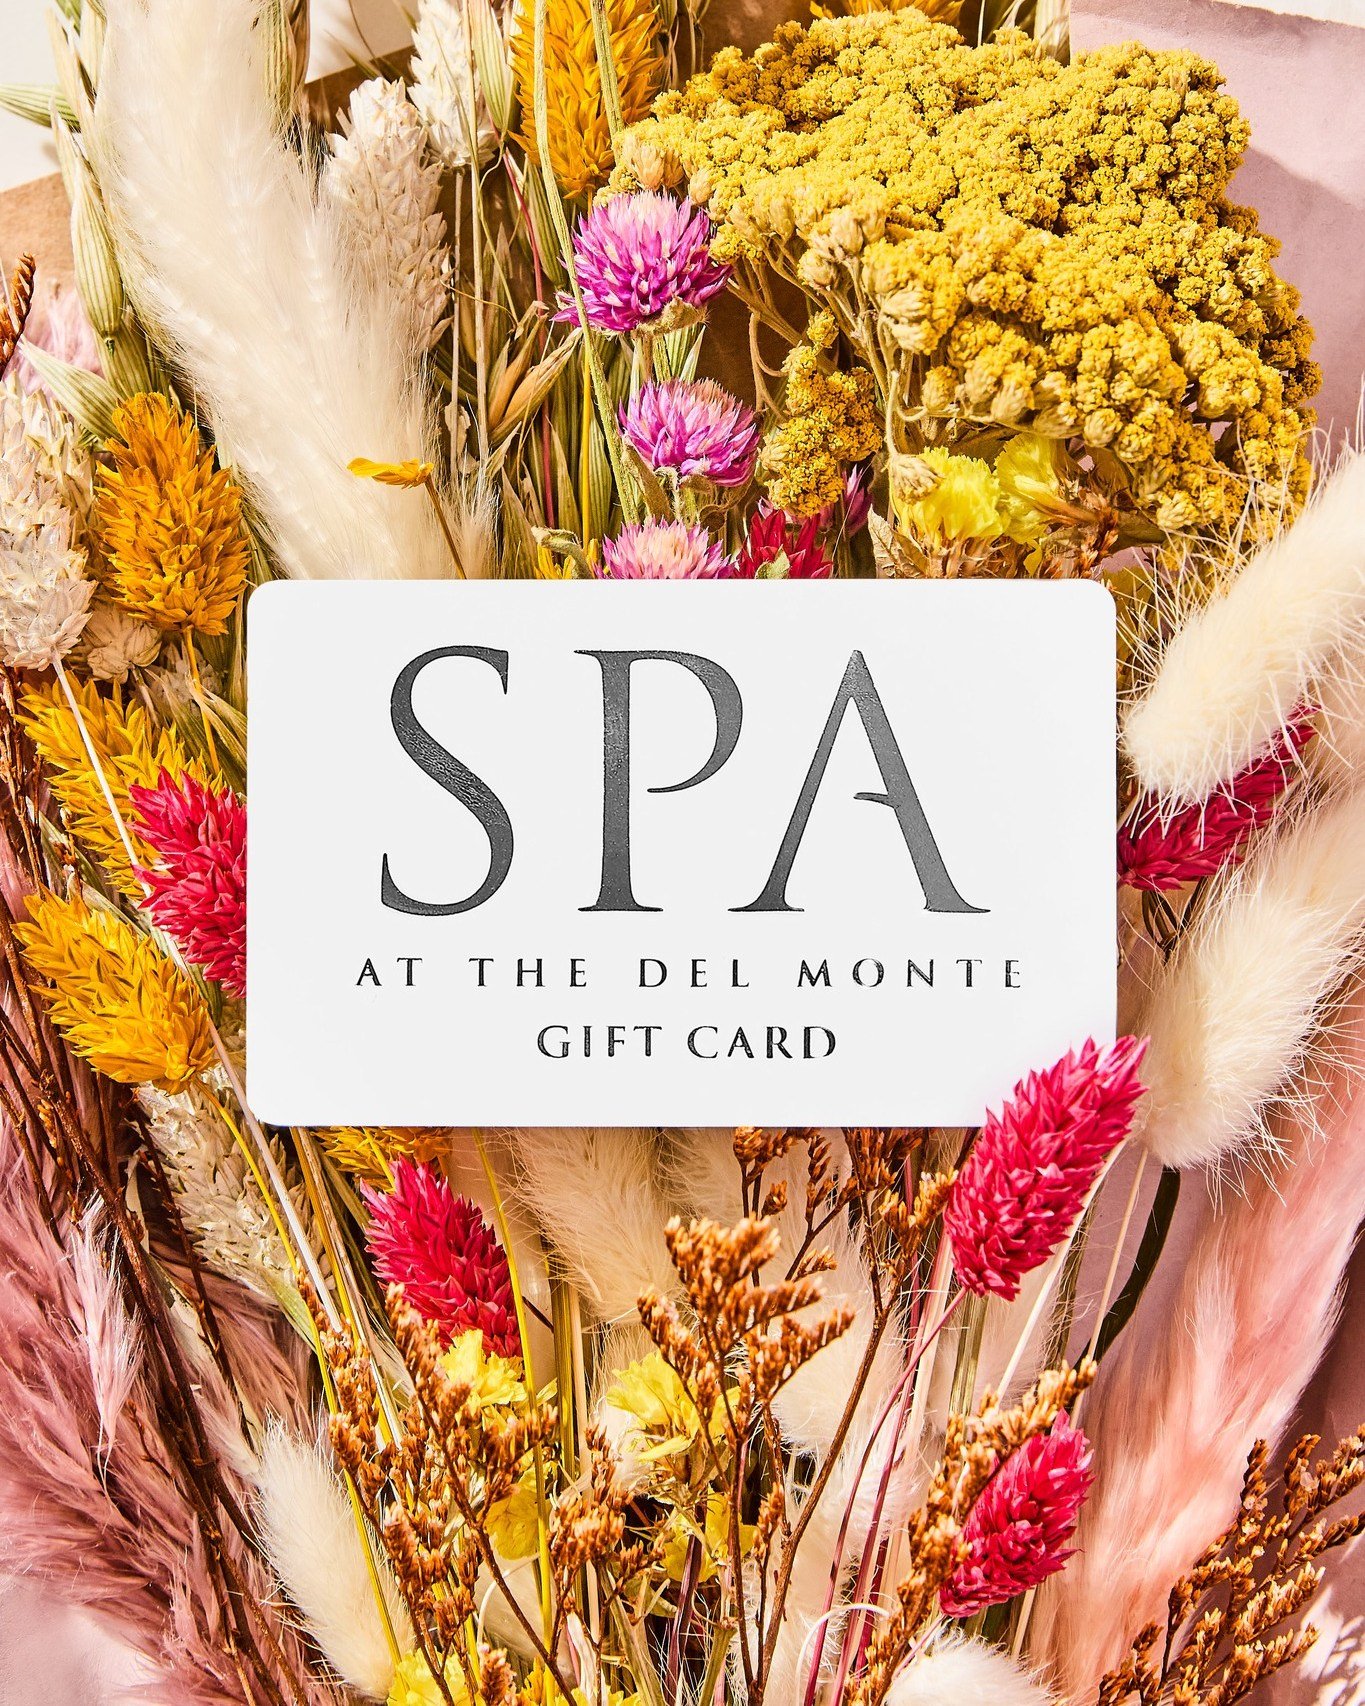 Mom, I love you a bunch! 💐
.
.
.
Show her how much you appreciate her with a Spa at the Del Monte gift card, available online or in store today!
.
#delmontespa #skinhealth #spalife #spalife #spa #dayspa #pittsford #skincare #shoplocal #treatyourself